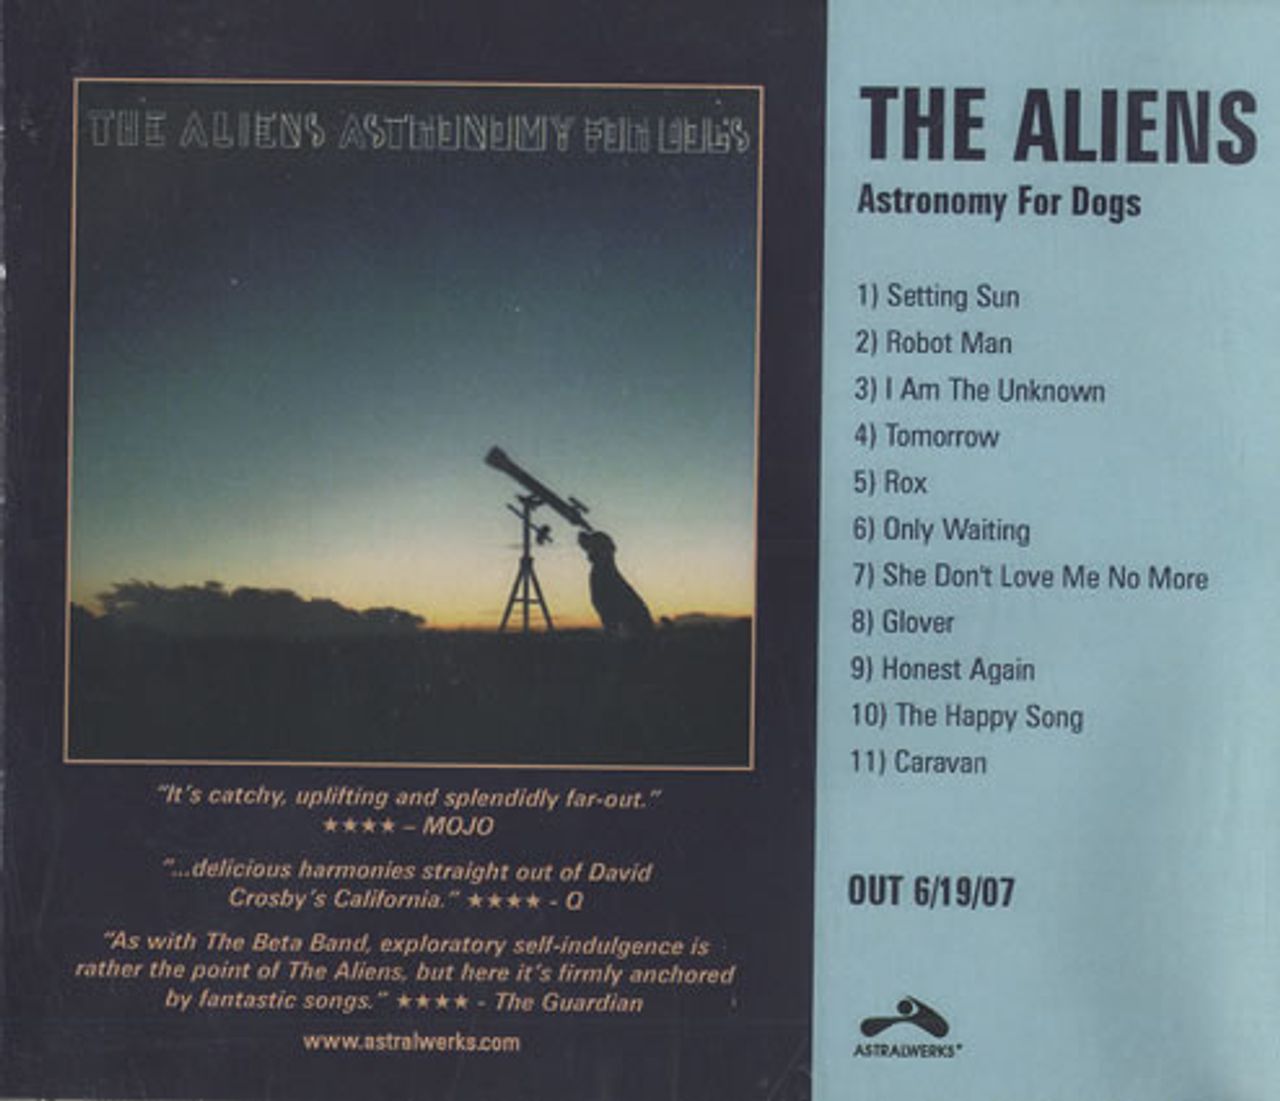 The Aliens Astronomy For Dogs US Promo CD-R acetate —